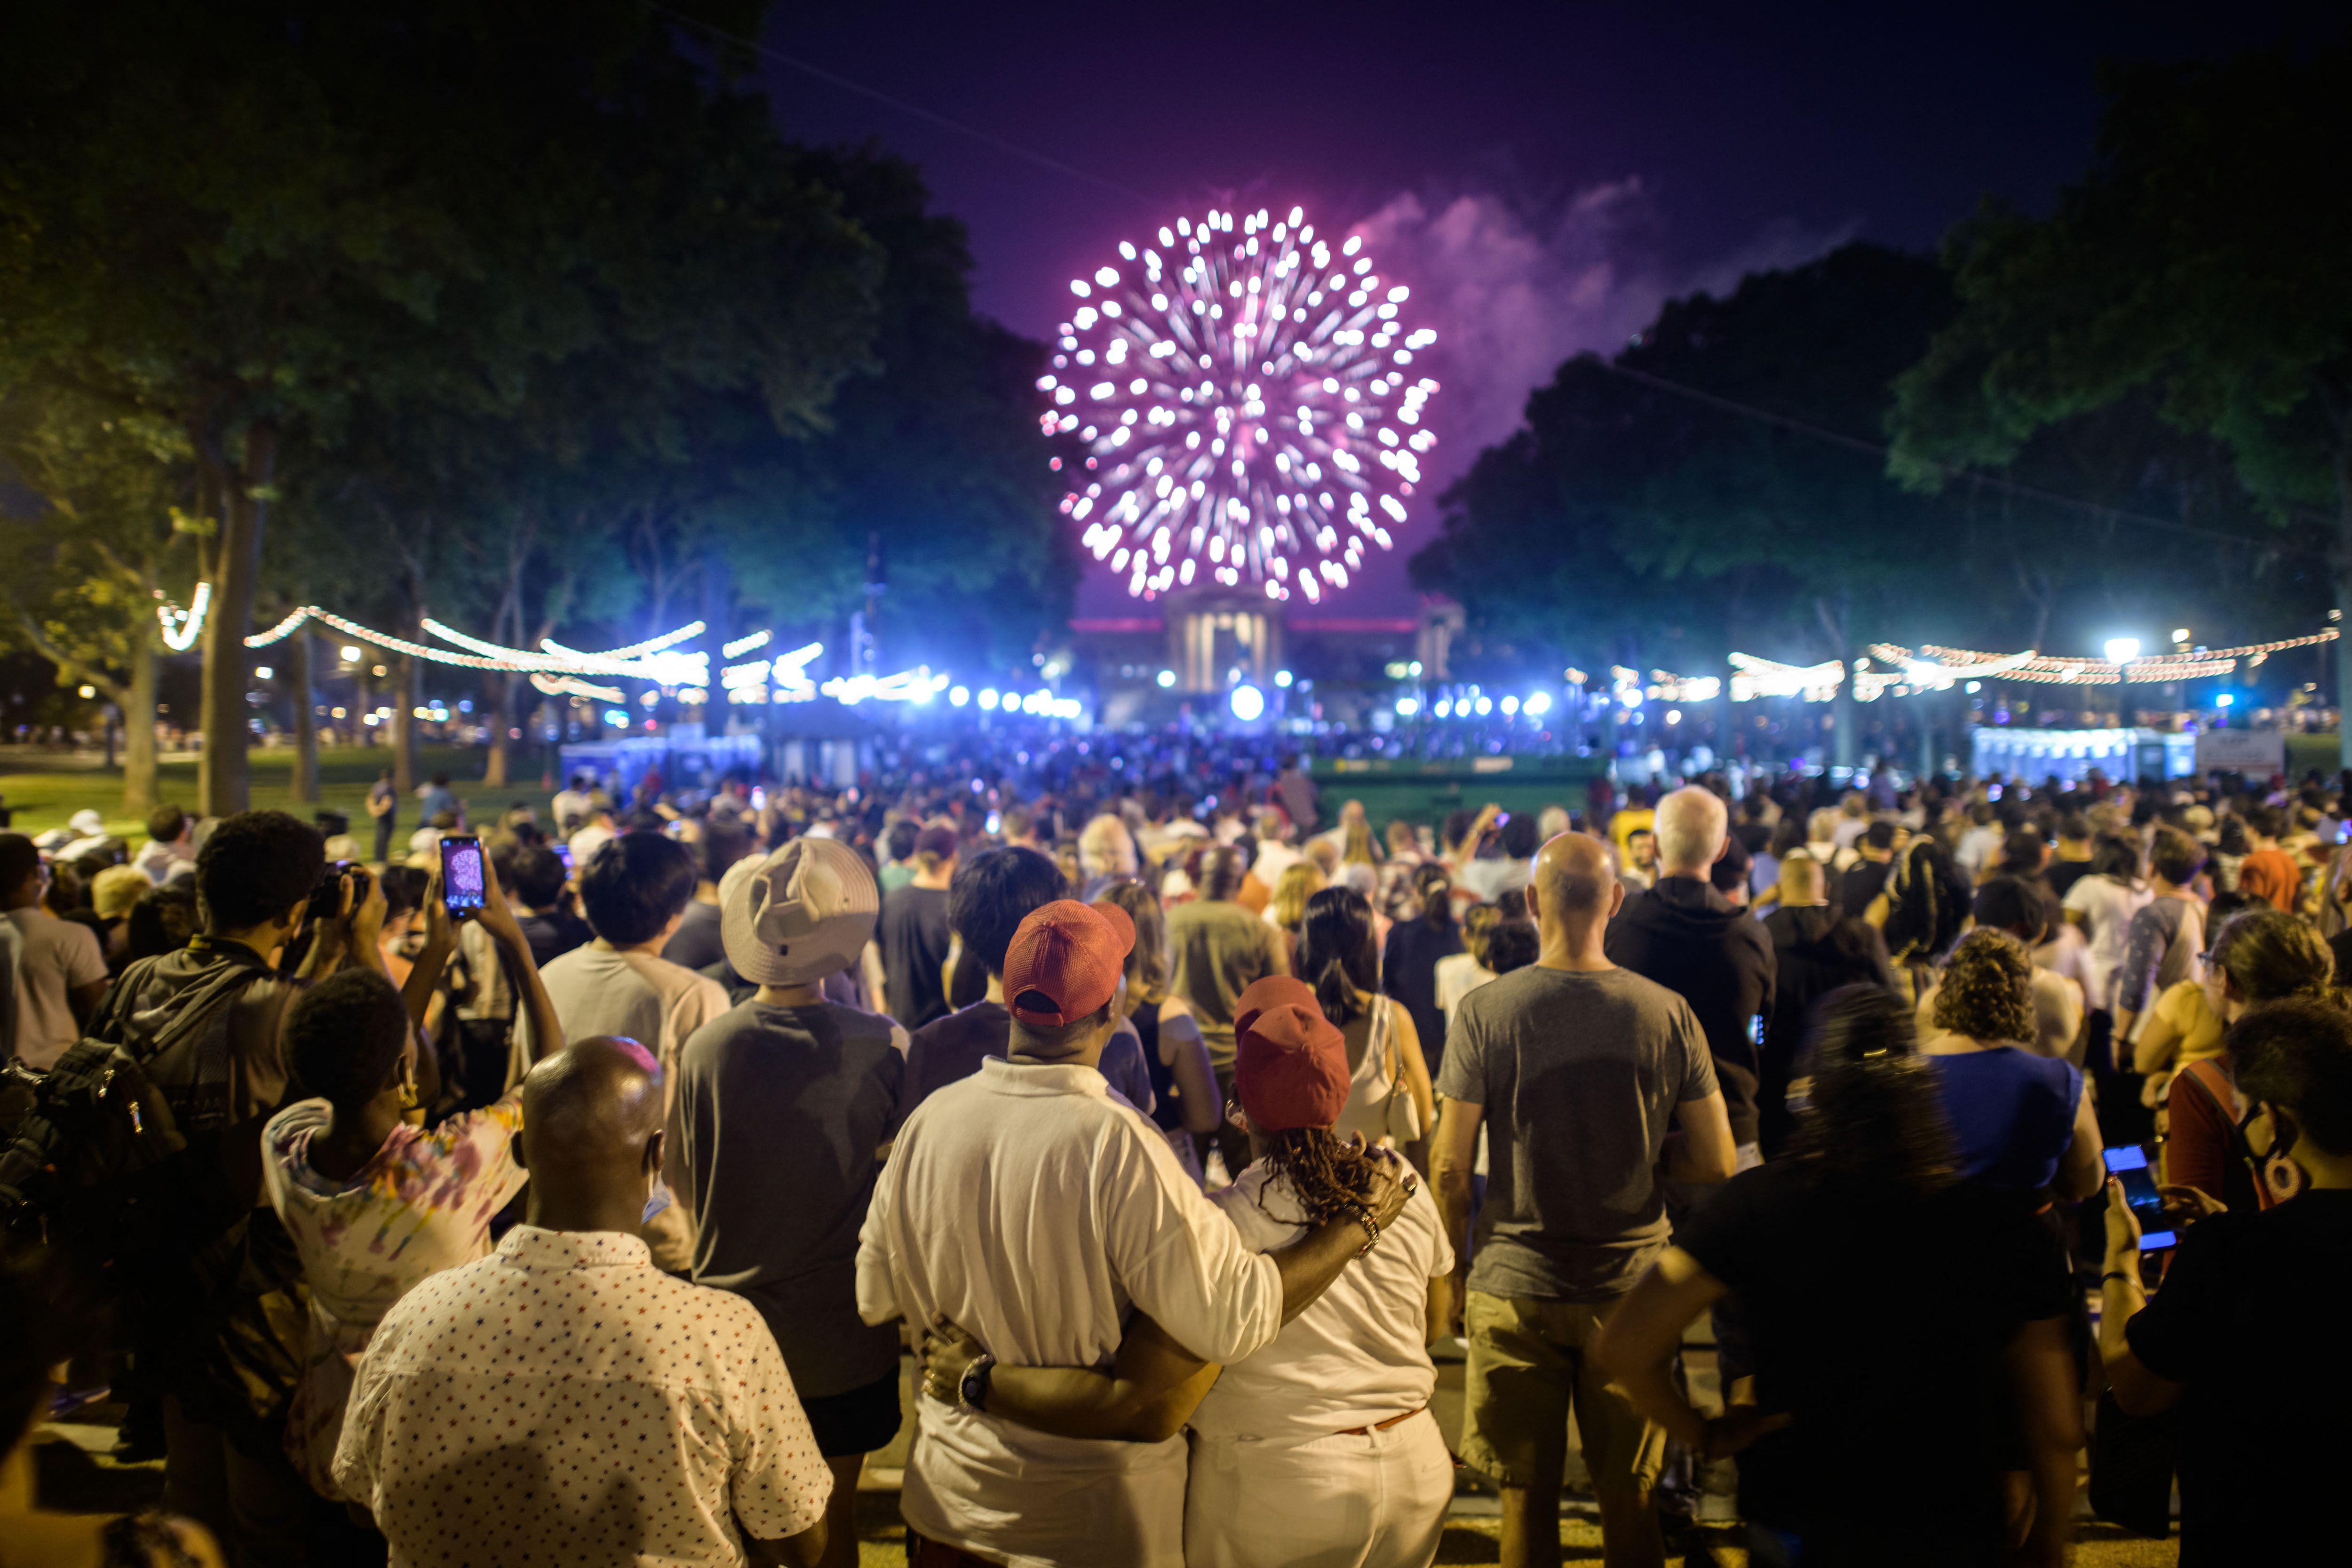  Spectators watch the annual Independence Day fireworks display outside the Philadelphia Museum of Art in Philadelphia on July 4